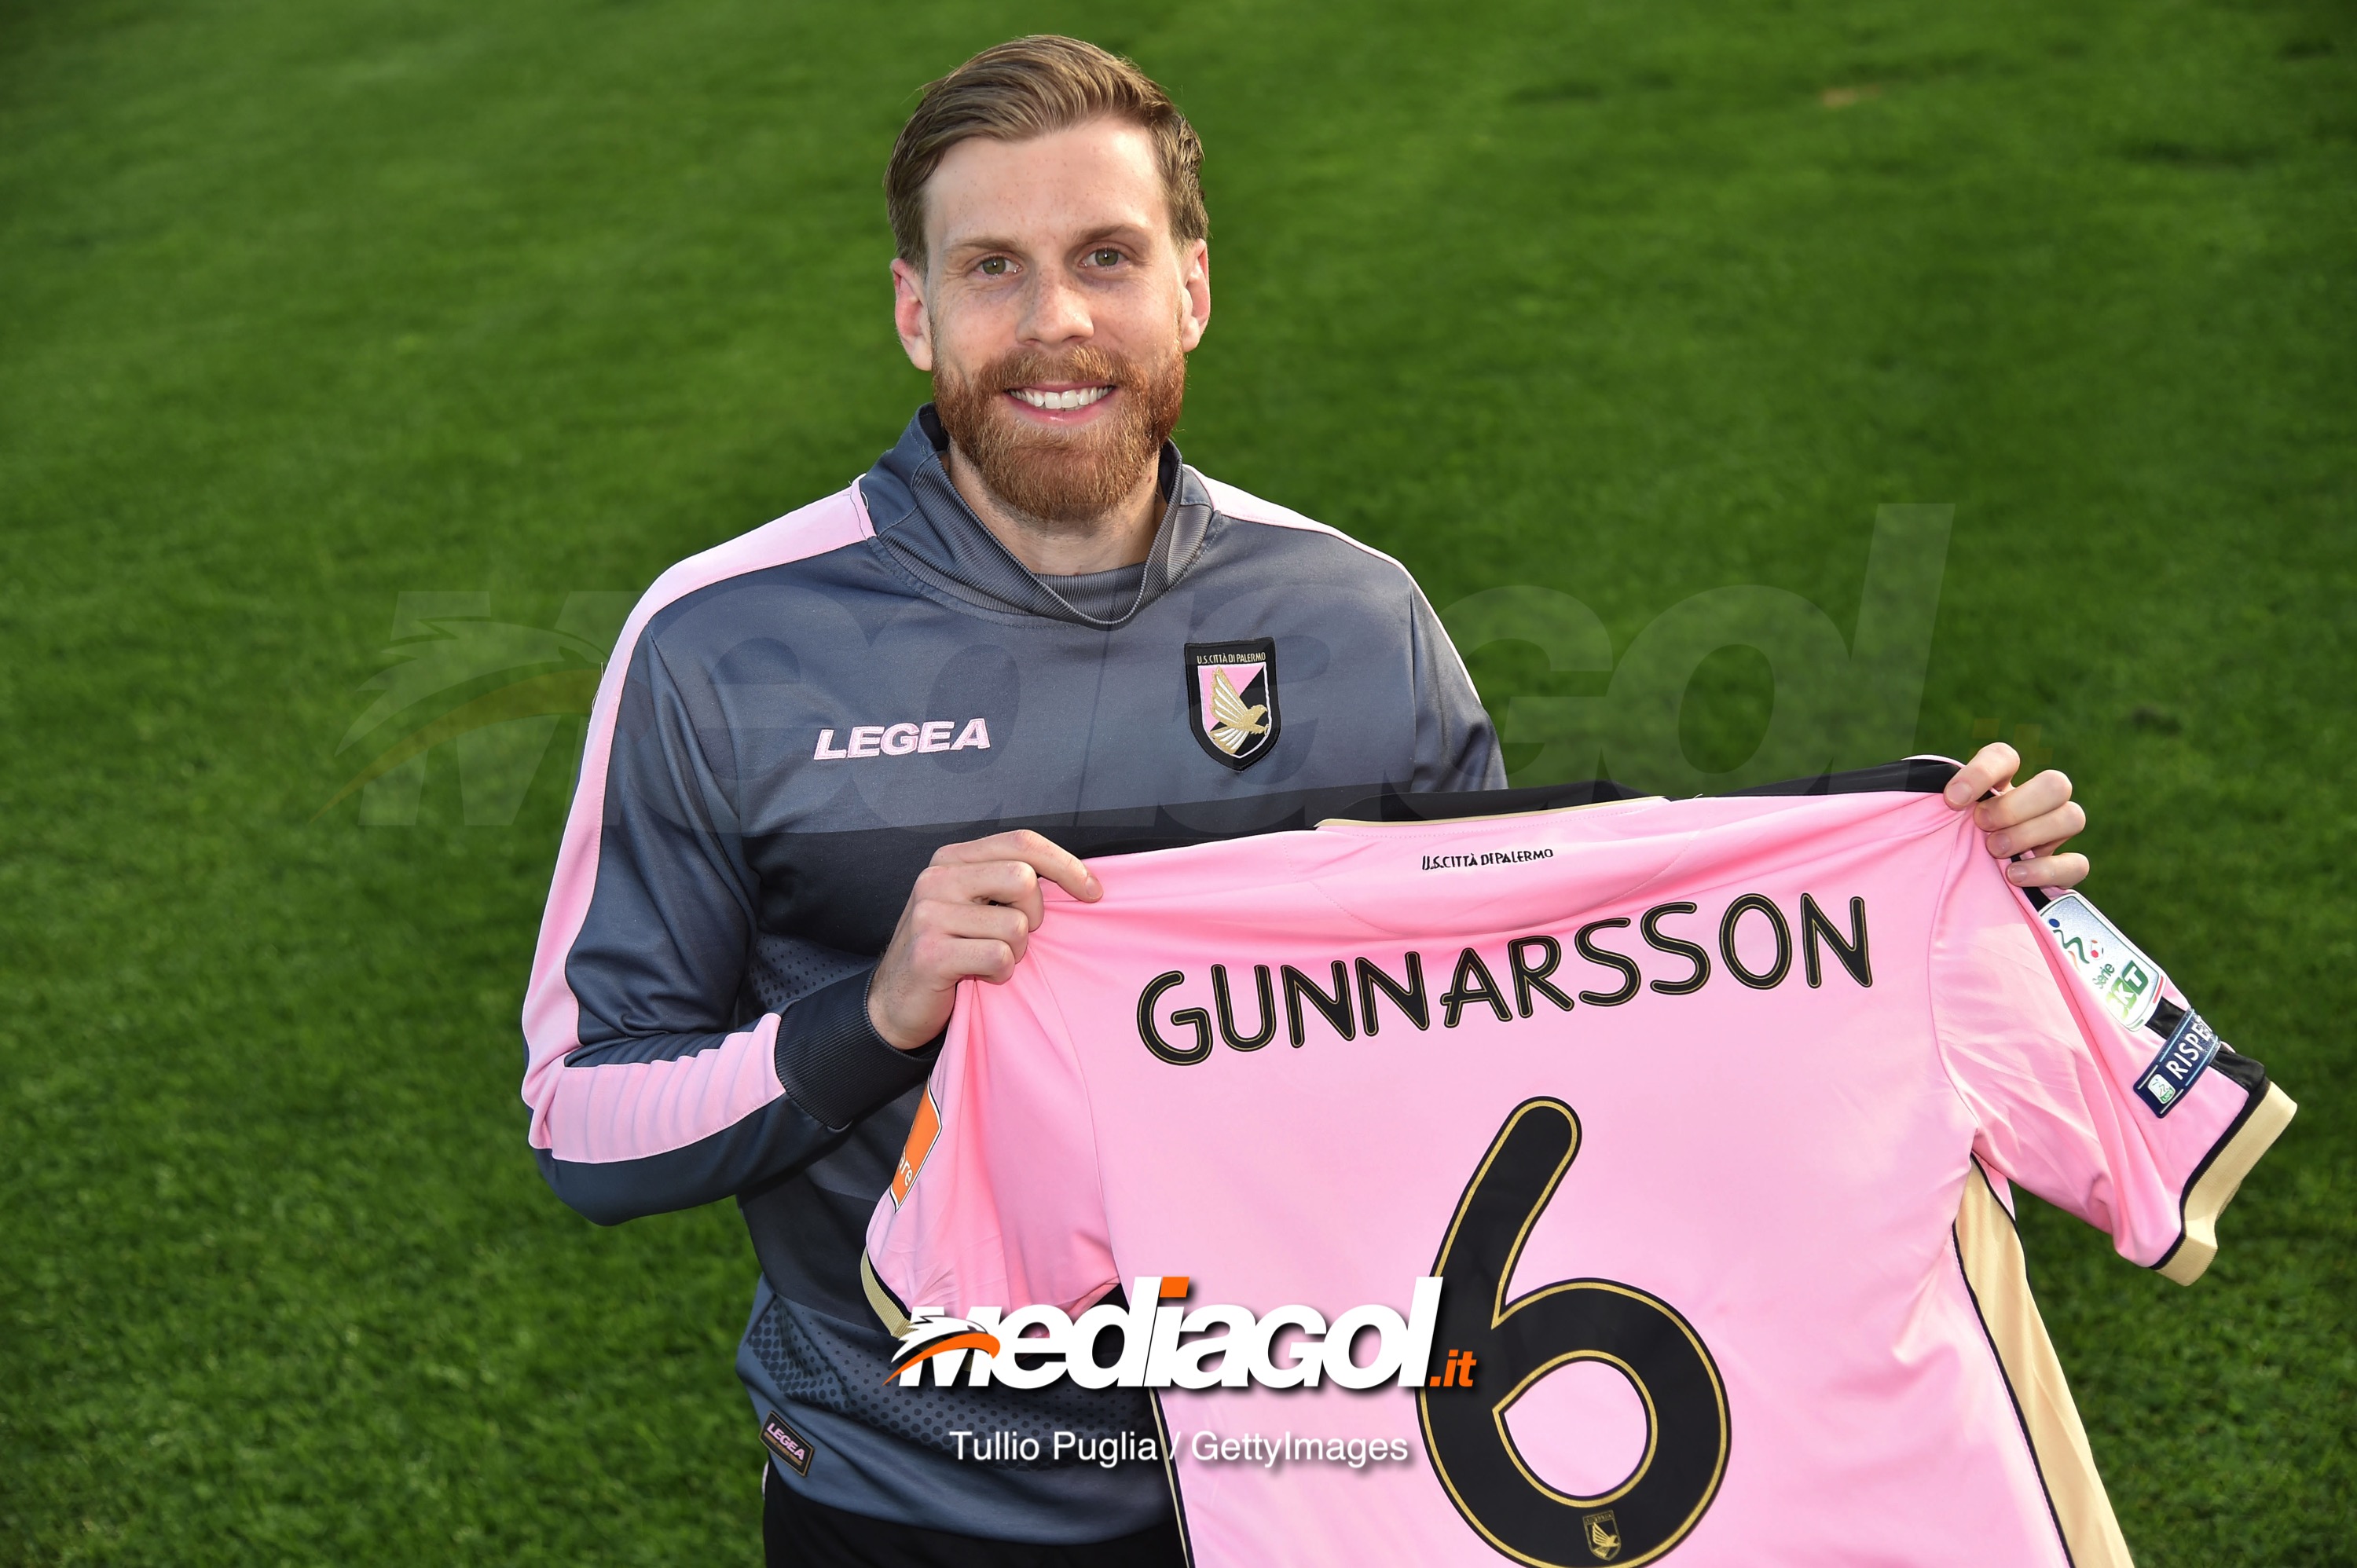 PALERMO, ITALY - MARCH 01: Niklas Gunnarsson poses during his presentation as new player of US Citta' di Palermo at Tenente Carmelo Onorato Sports Center on March 01, 2019 in Palermo, Italy. (Photo by Tullio M. Puglia/Getty Images)